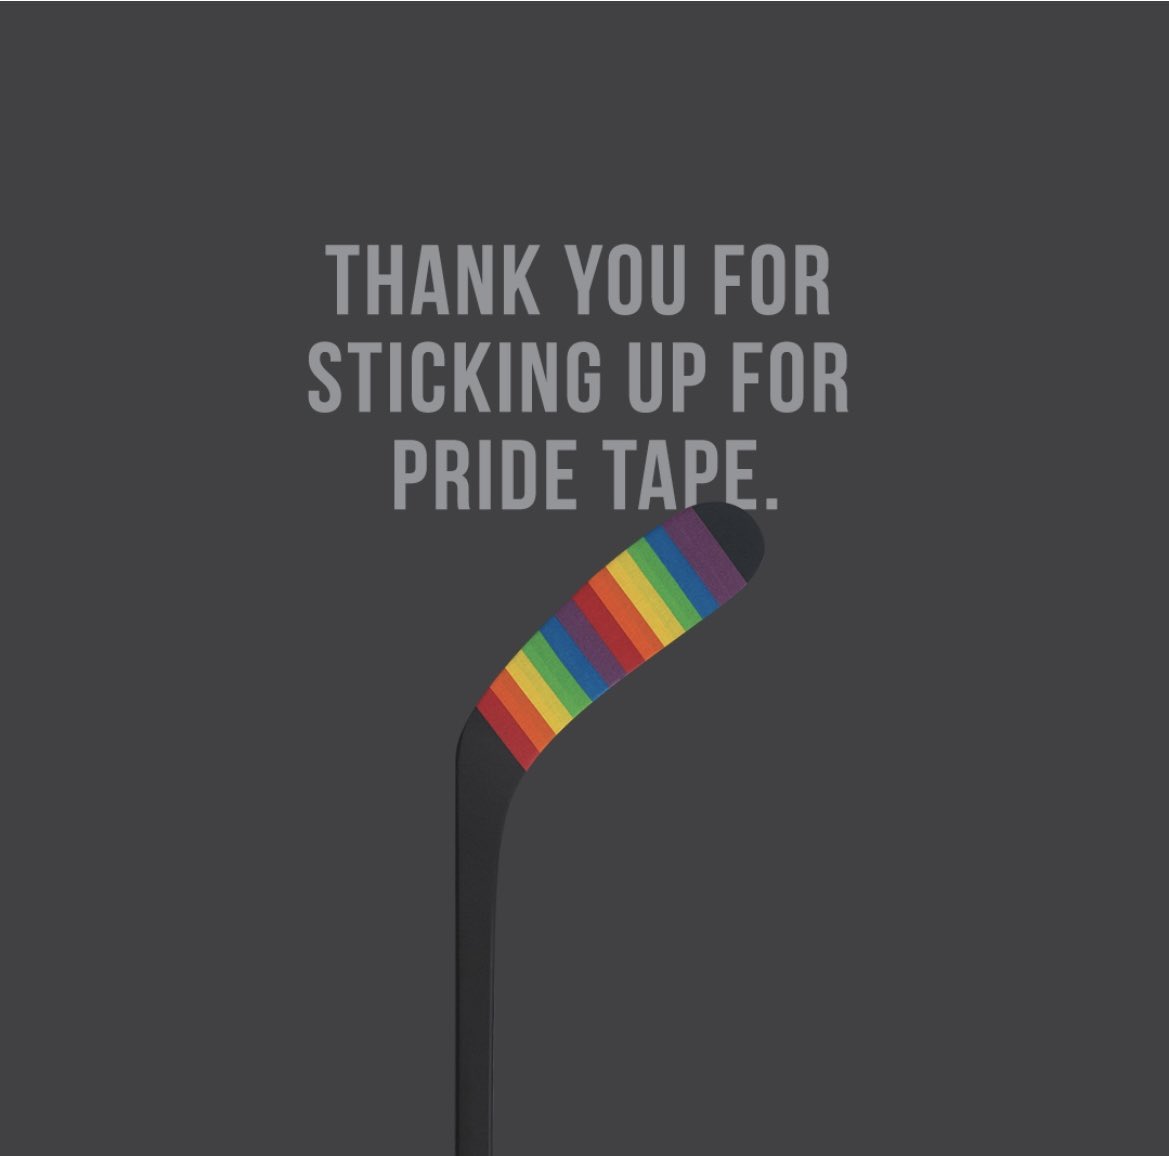 We are so very grateful to everyone who believes hockey should be a safe, inclusive, and welcoming space for all. We are extremely happy that NHL players will now have the option to voluntarily represent important social causes with their stick tape throughout season. @nhl @NHLPA